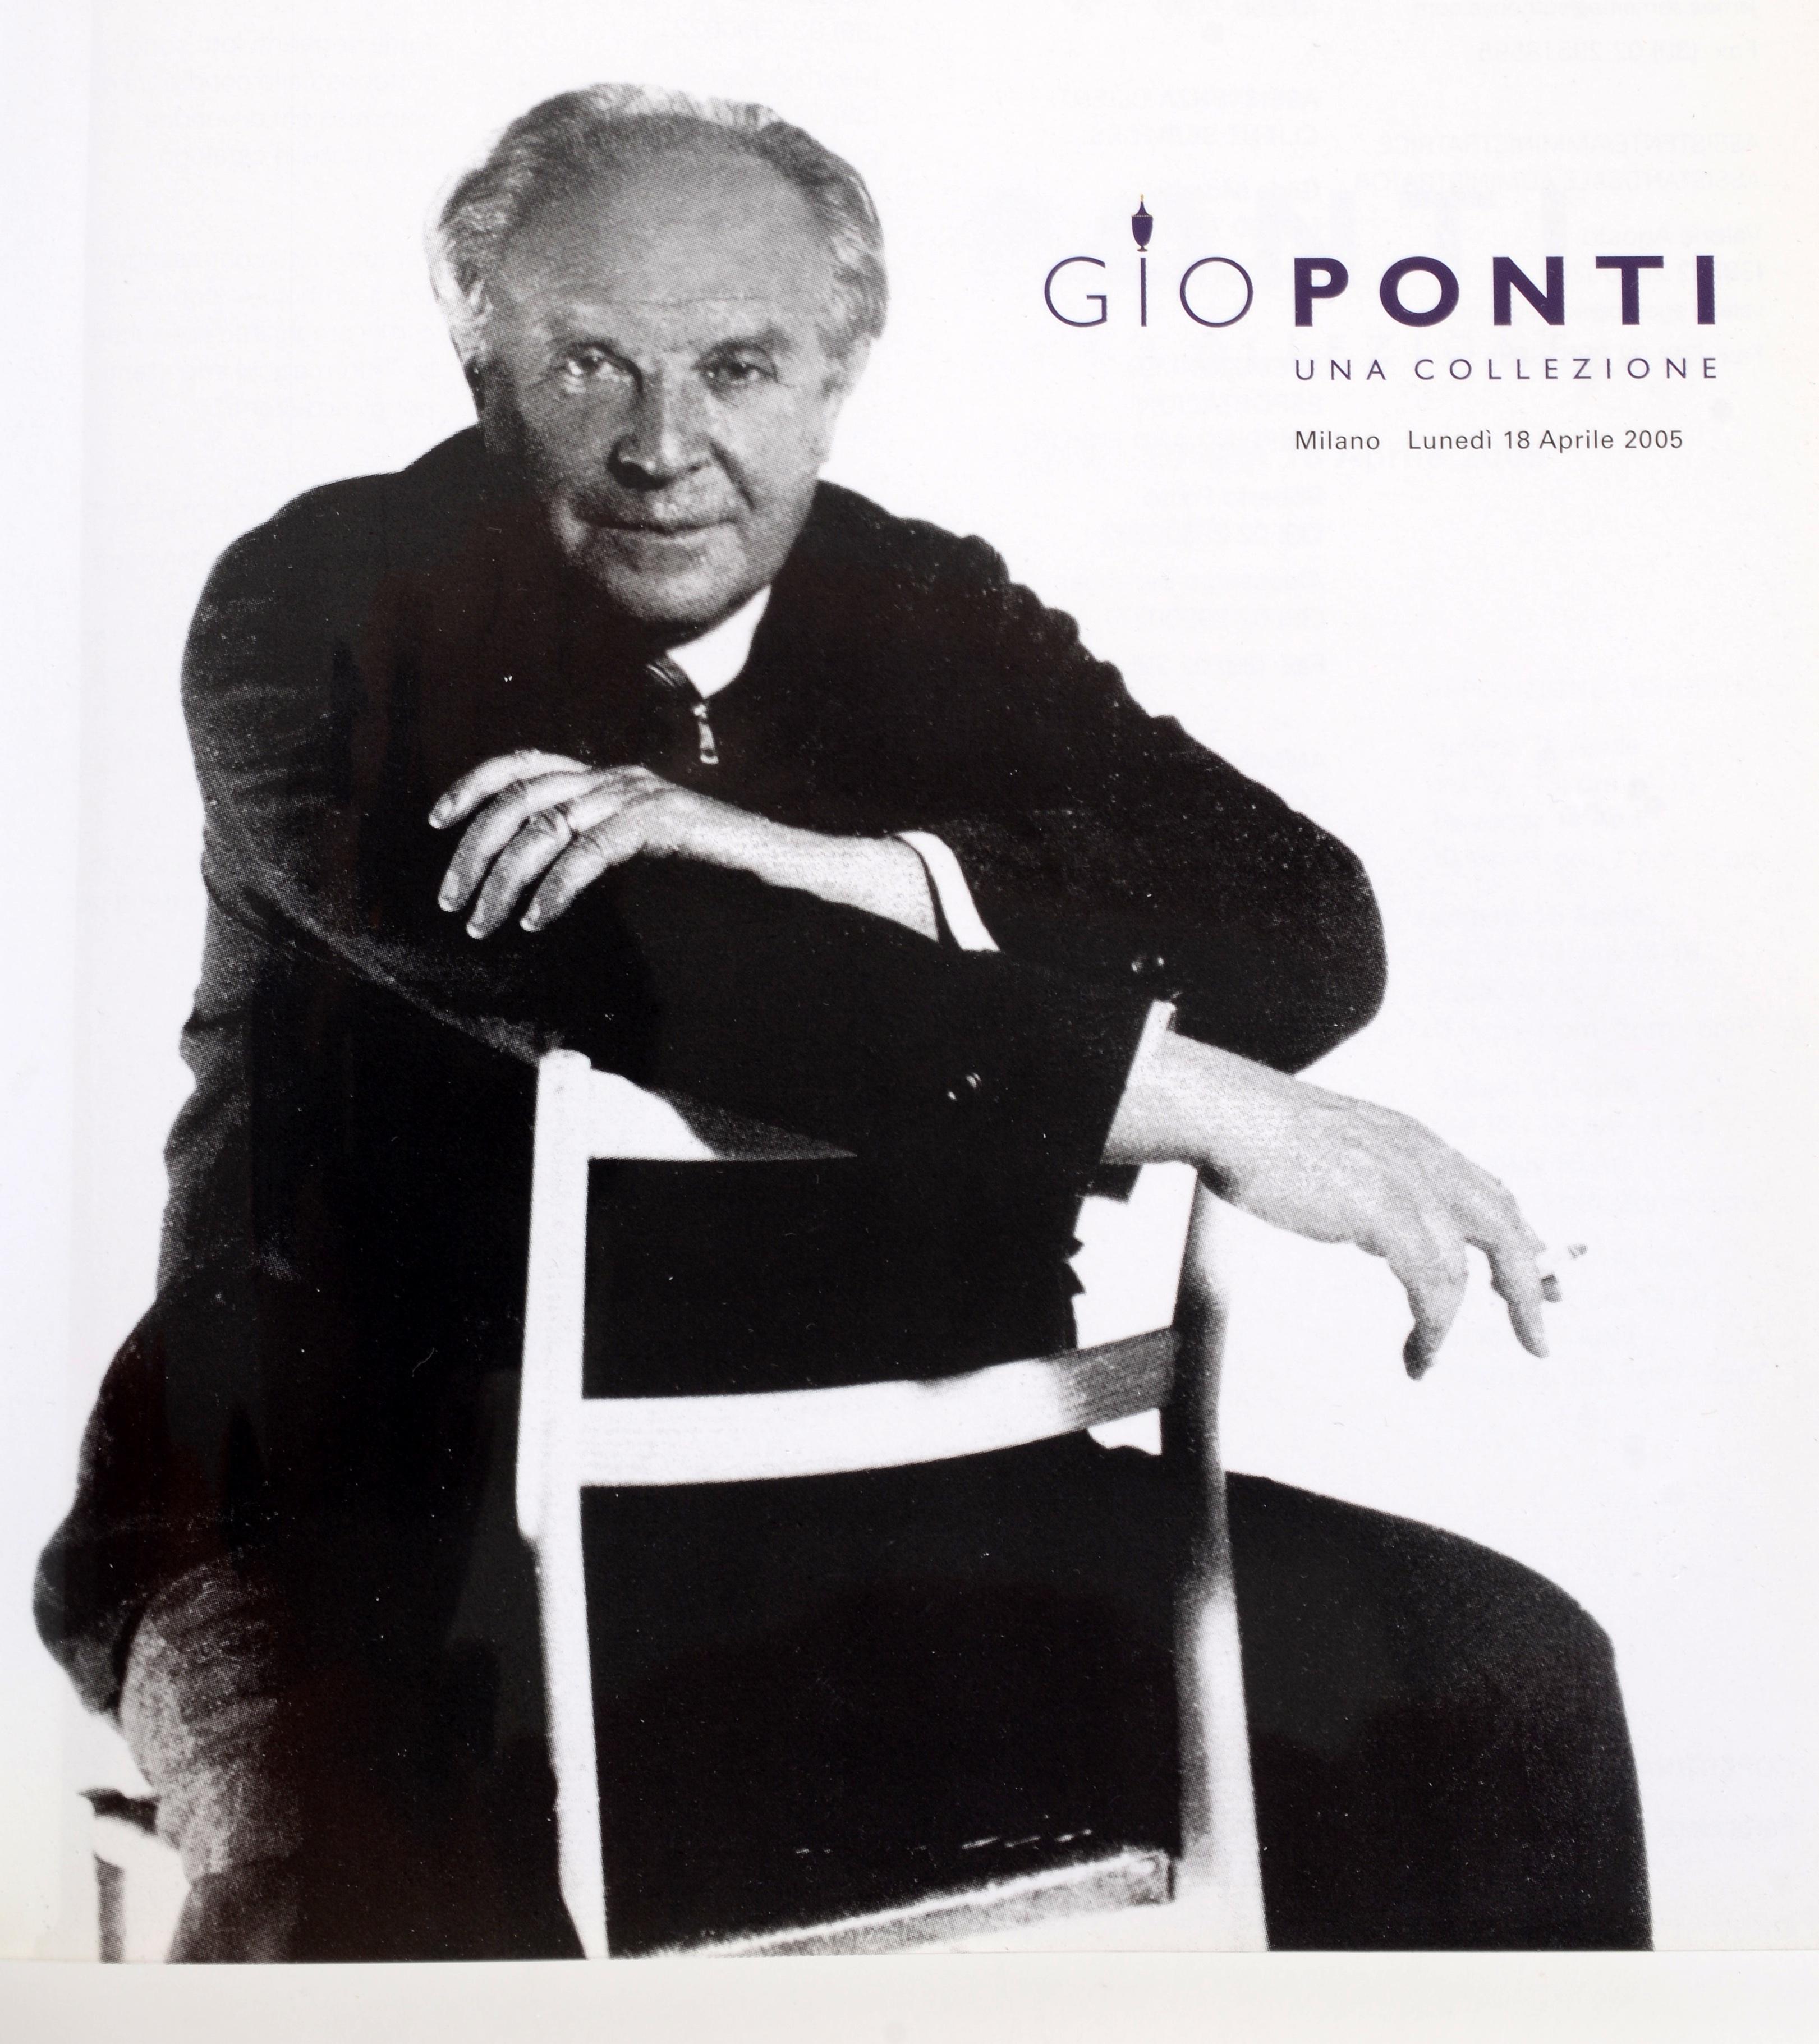 Gio Ponti, Una Collezione Sotheby's Sale Catalogue, 2005 in Milano. 1st Ed softcover auction catalog. Sotheby's auction catalogue of a sale of works by the influential and one of the most important Italian designers of the 20th c. 79 lots covering